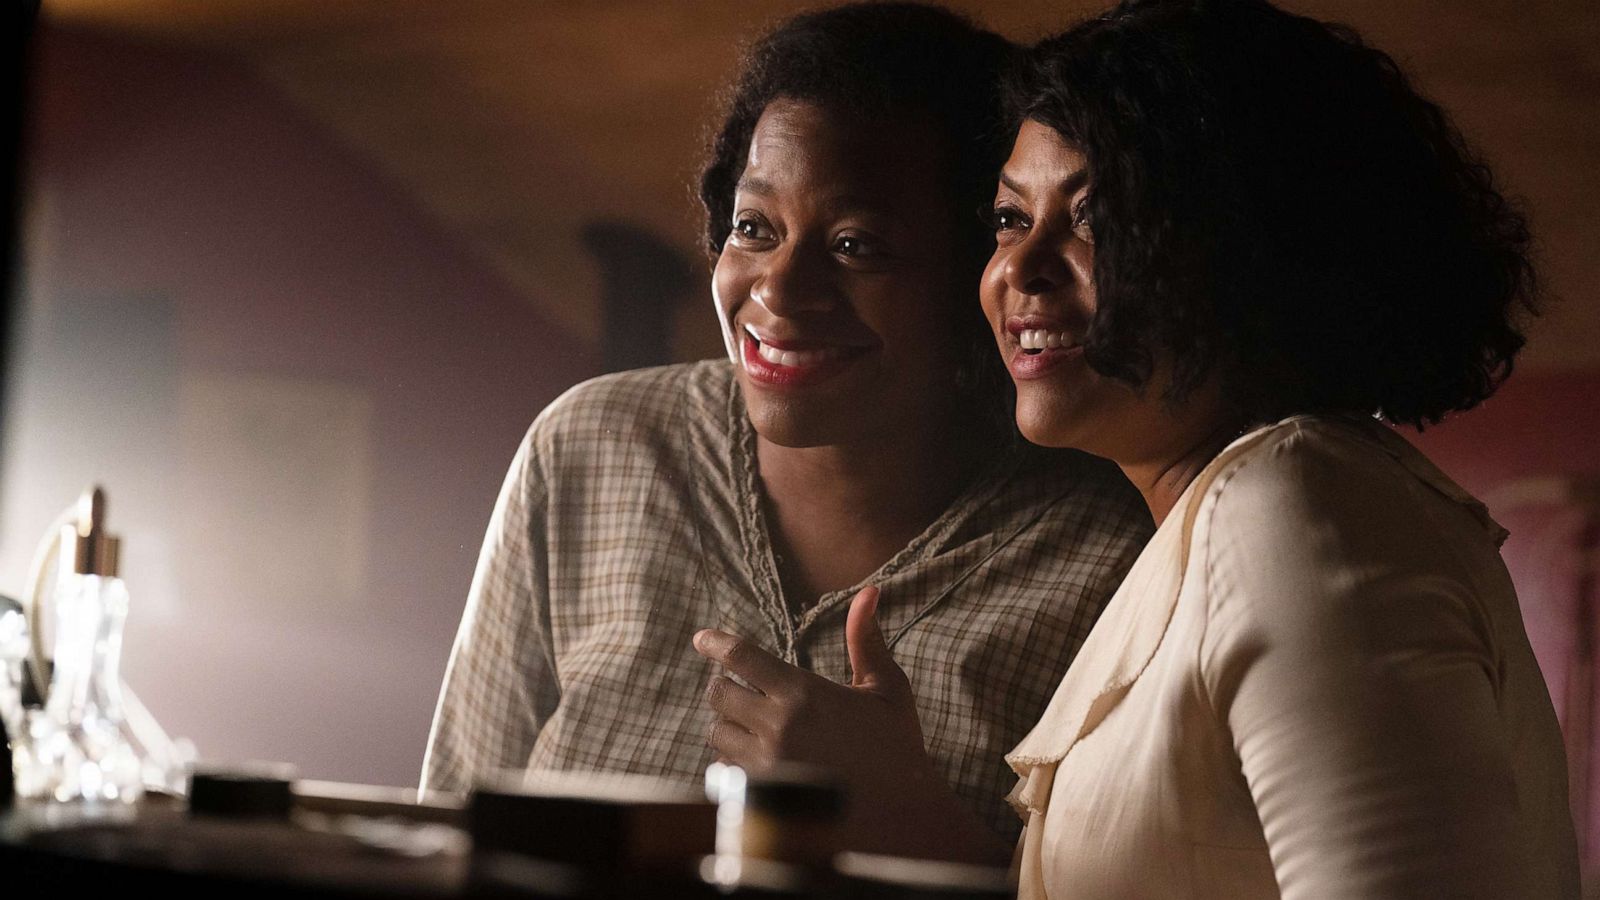 PHOTO: From left, Fantasia Barrino as Celie and Taraji P. Henson as Shug Avery in Warner Bros. Pictures' bold new take on a classic, "The Color Purple."